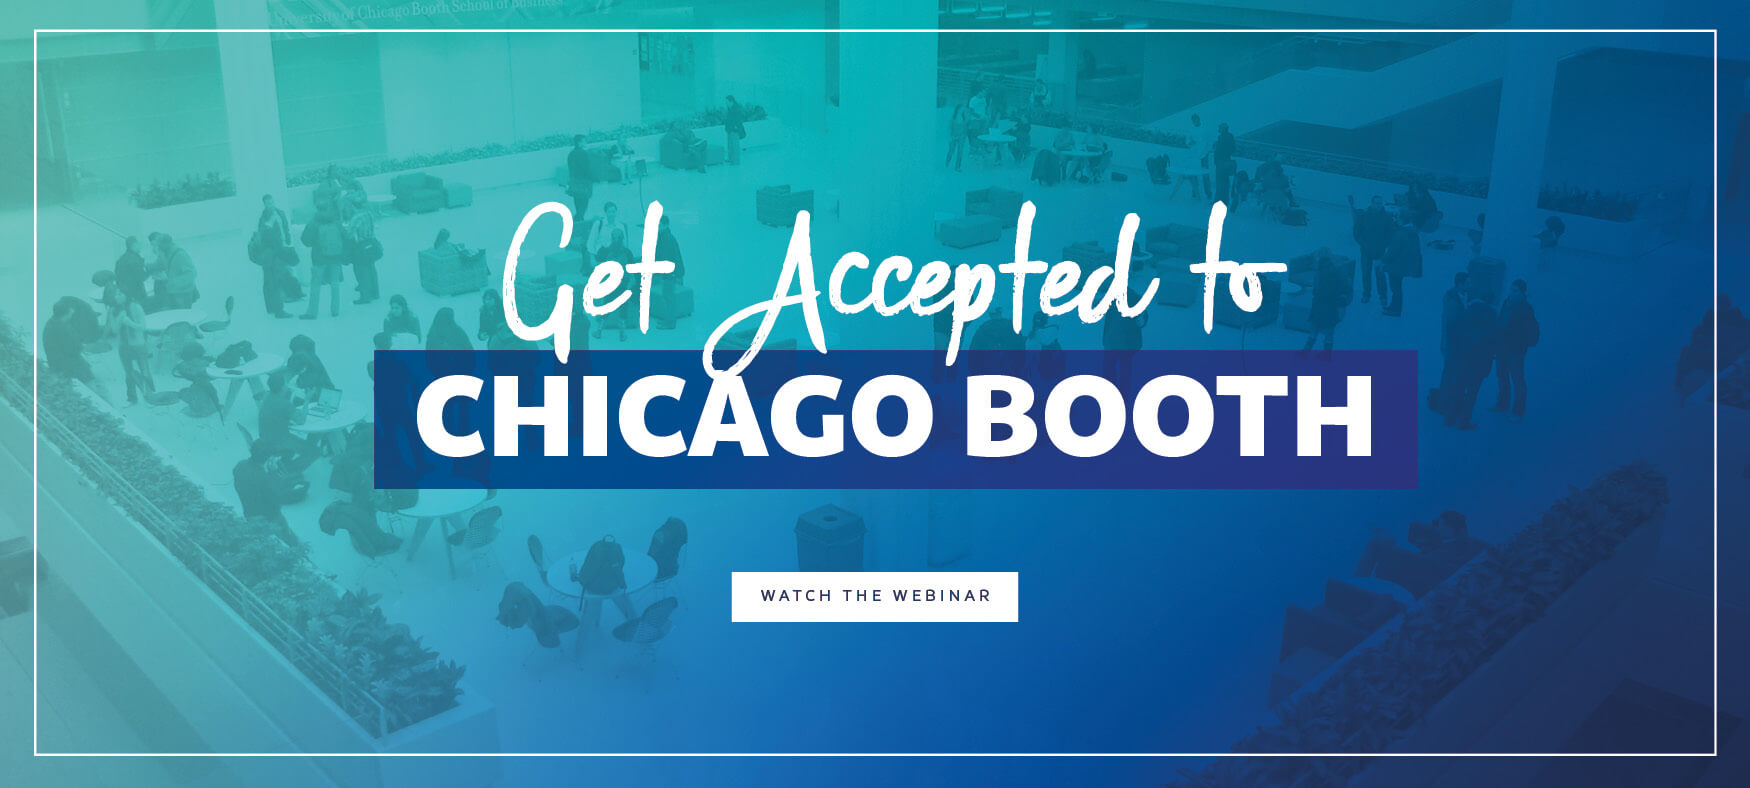 Chicago booth weekend mba essay